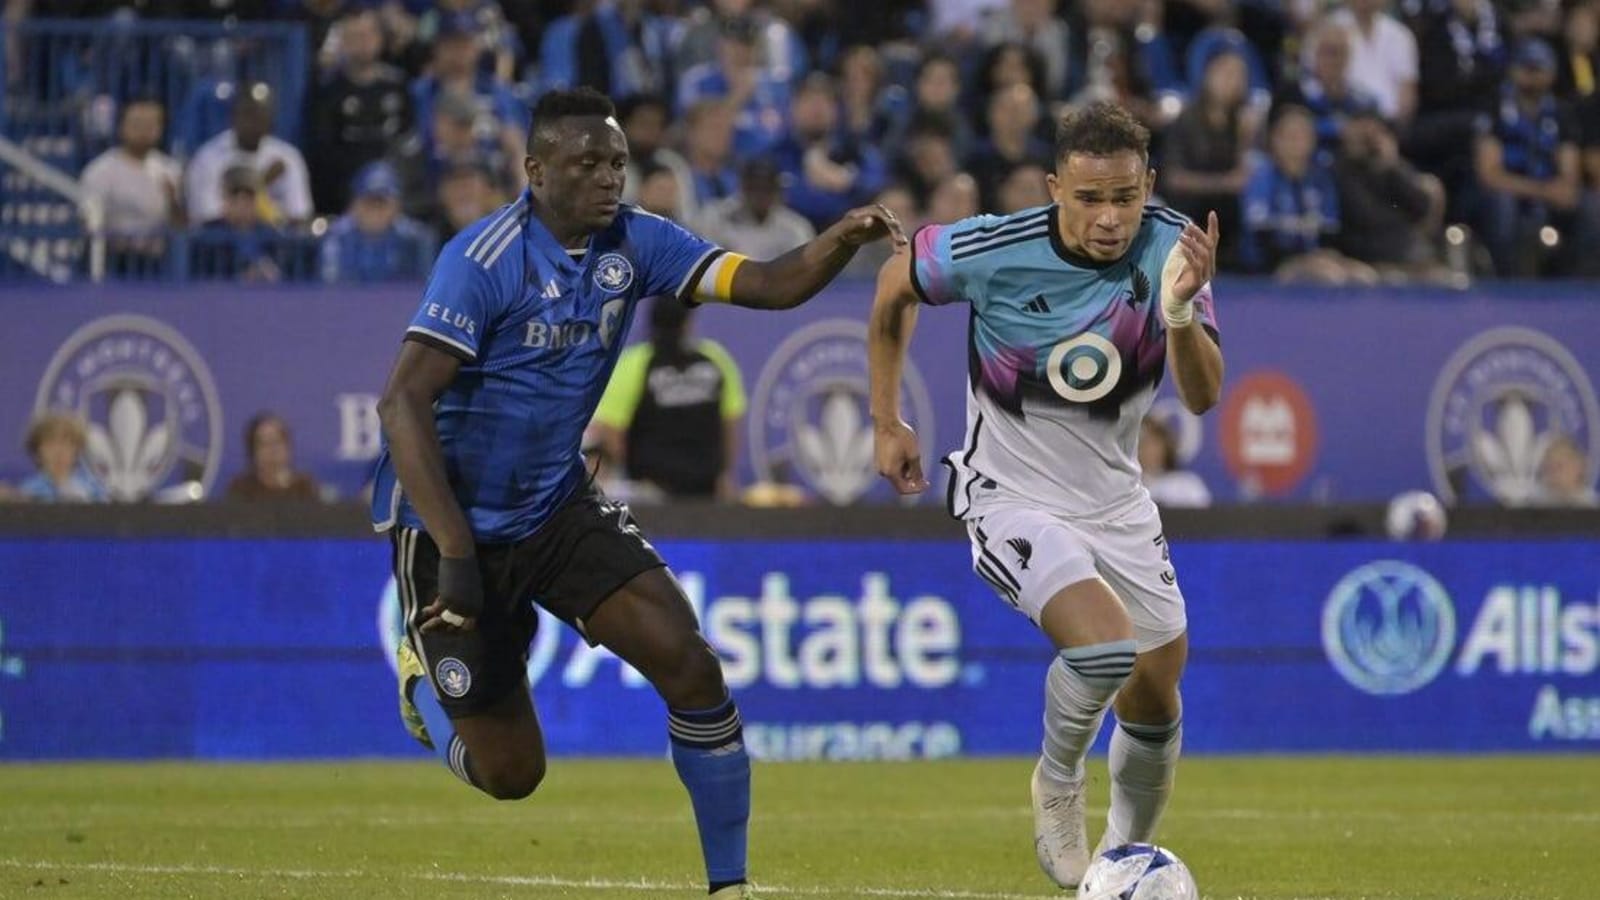 CF Montreal rout Loons 4-0 behind Mason Toye’s brace